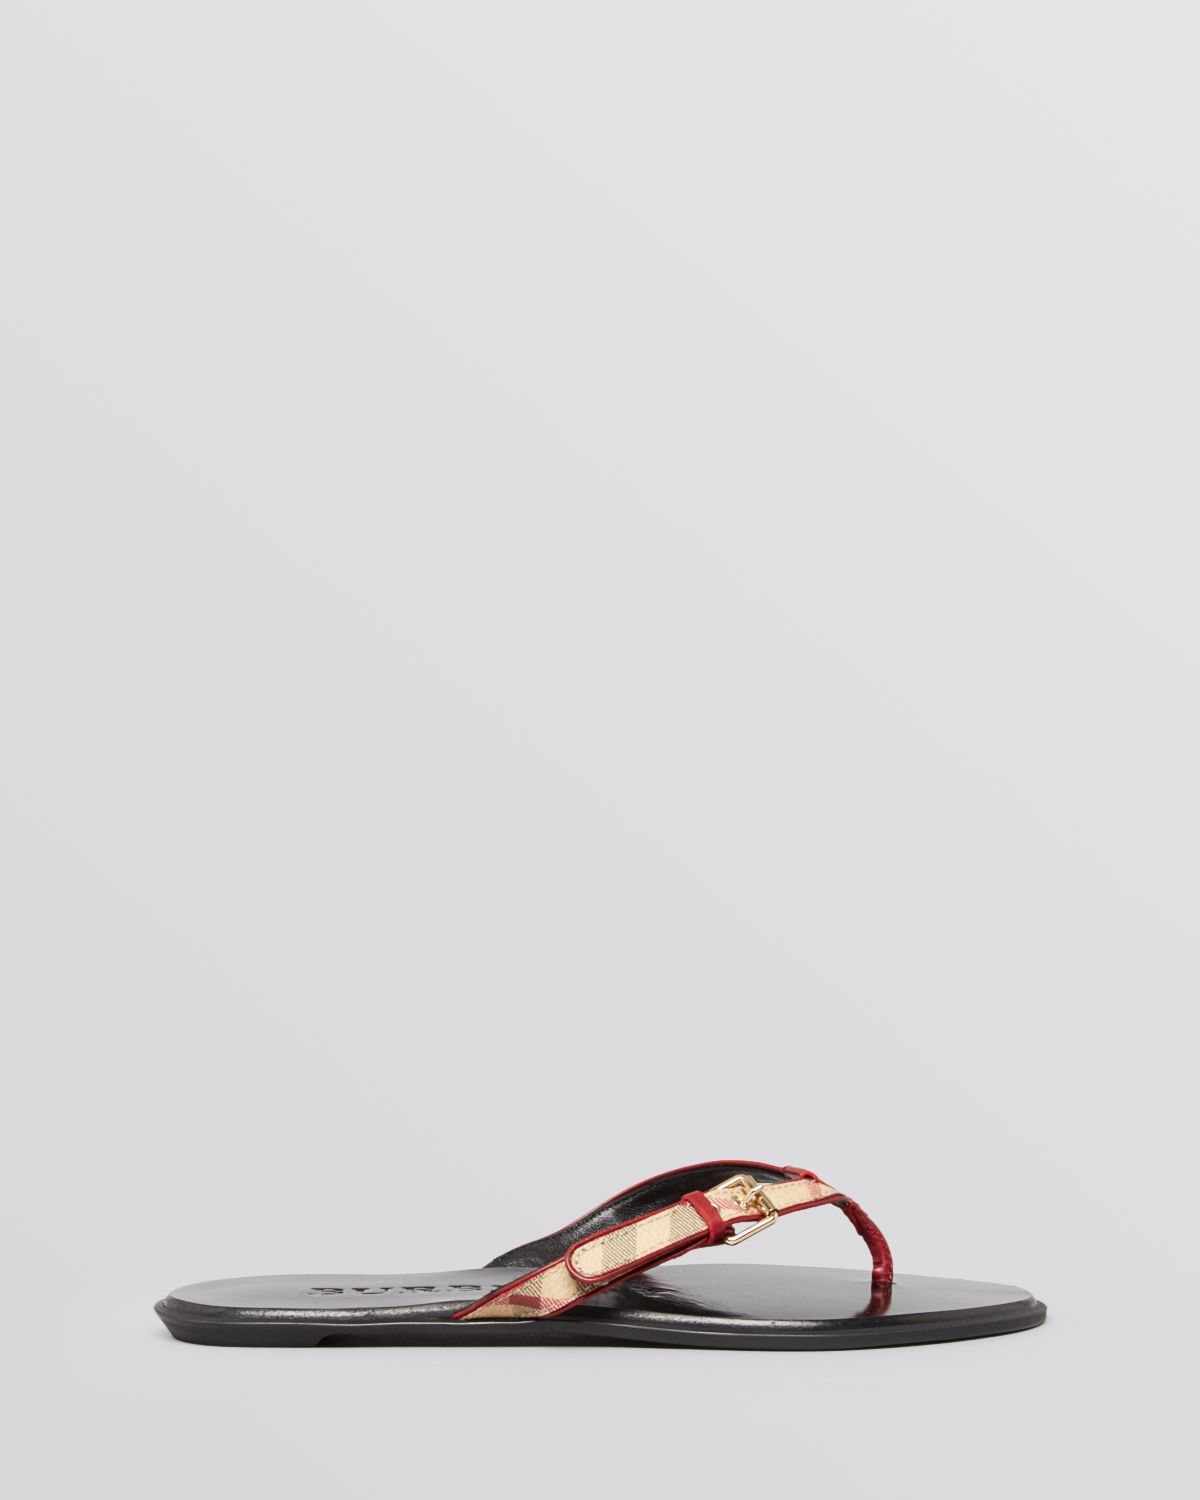 Burberry Rubber Thong Sandals | IUCN Water